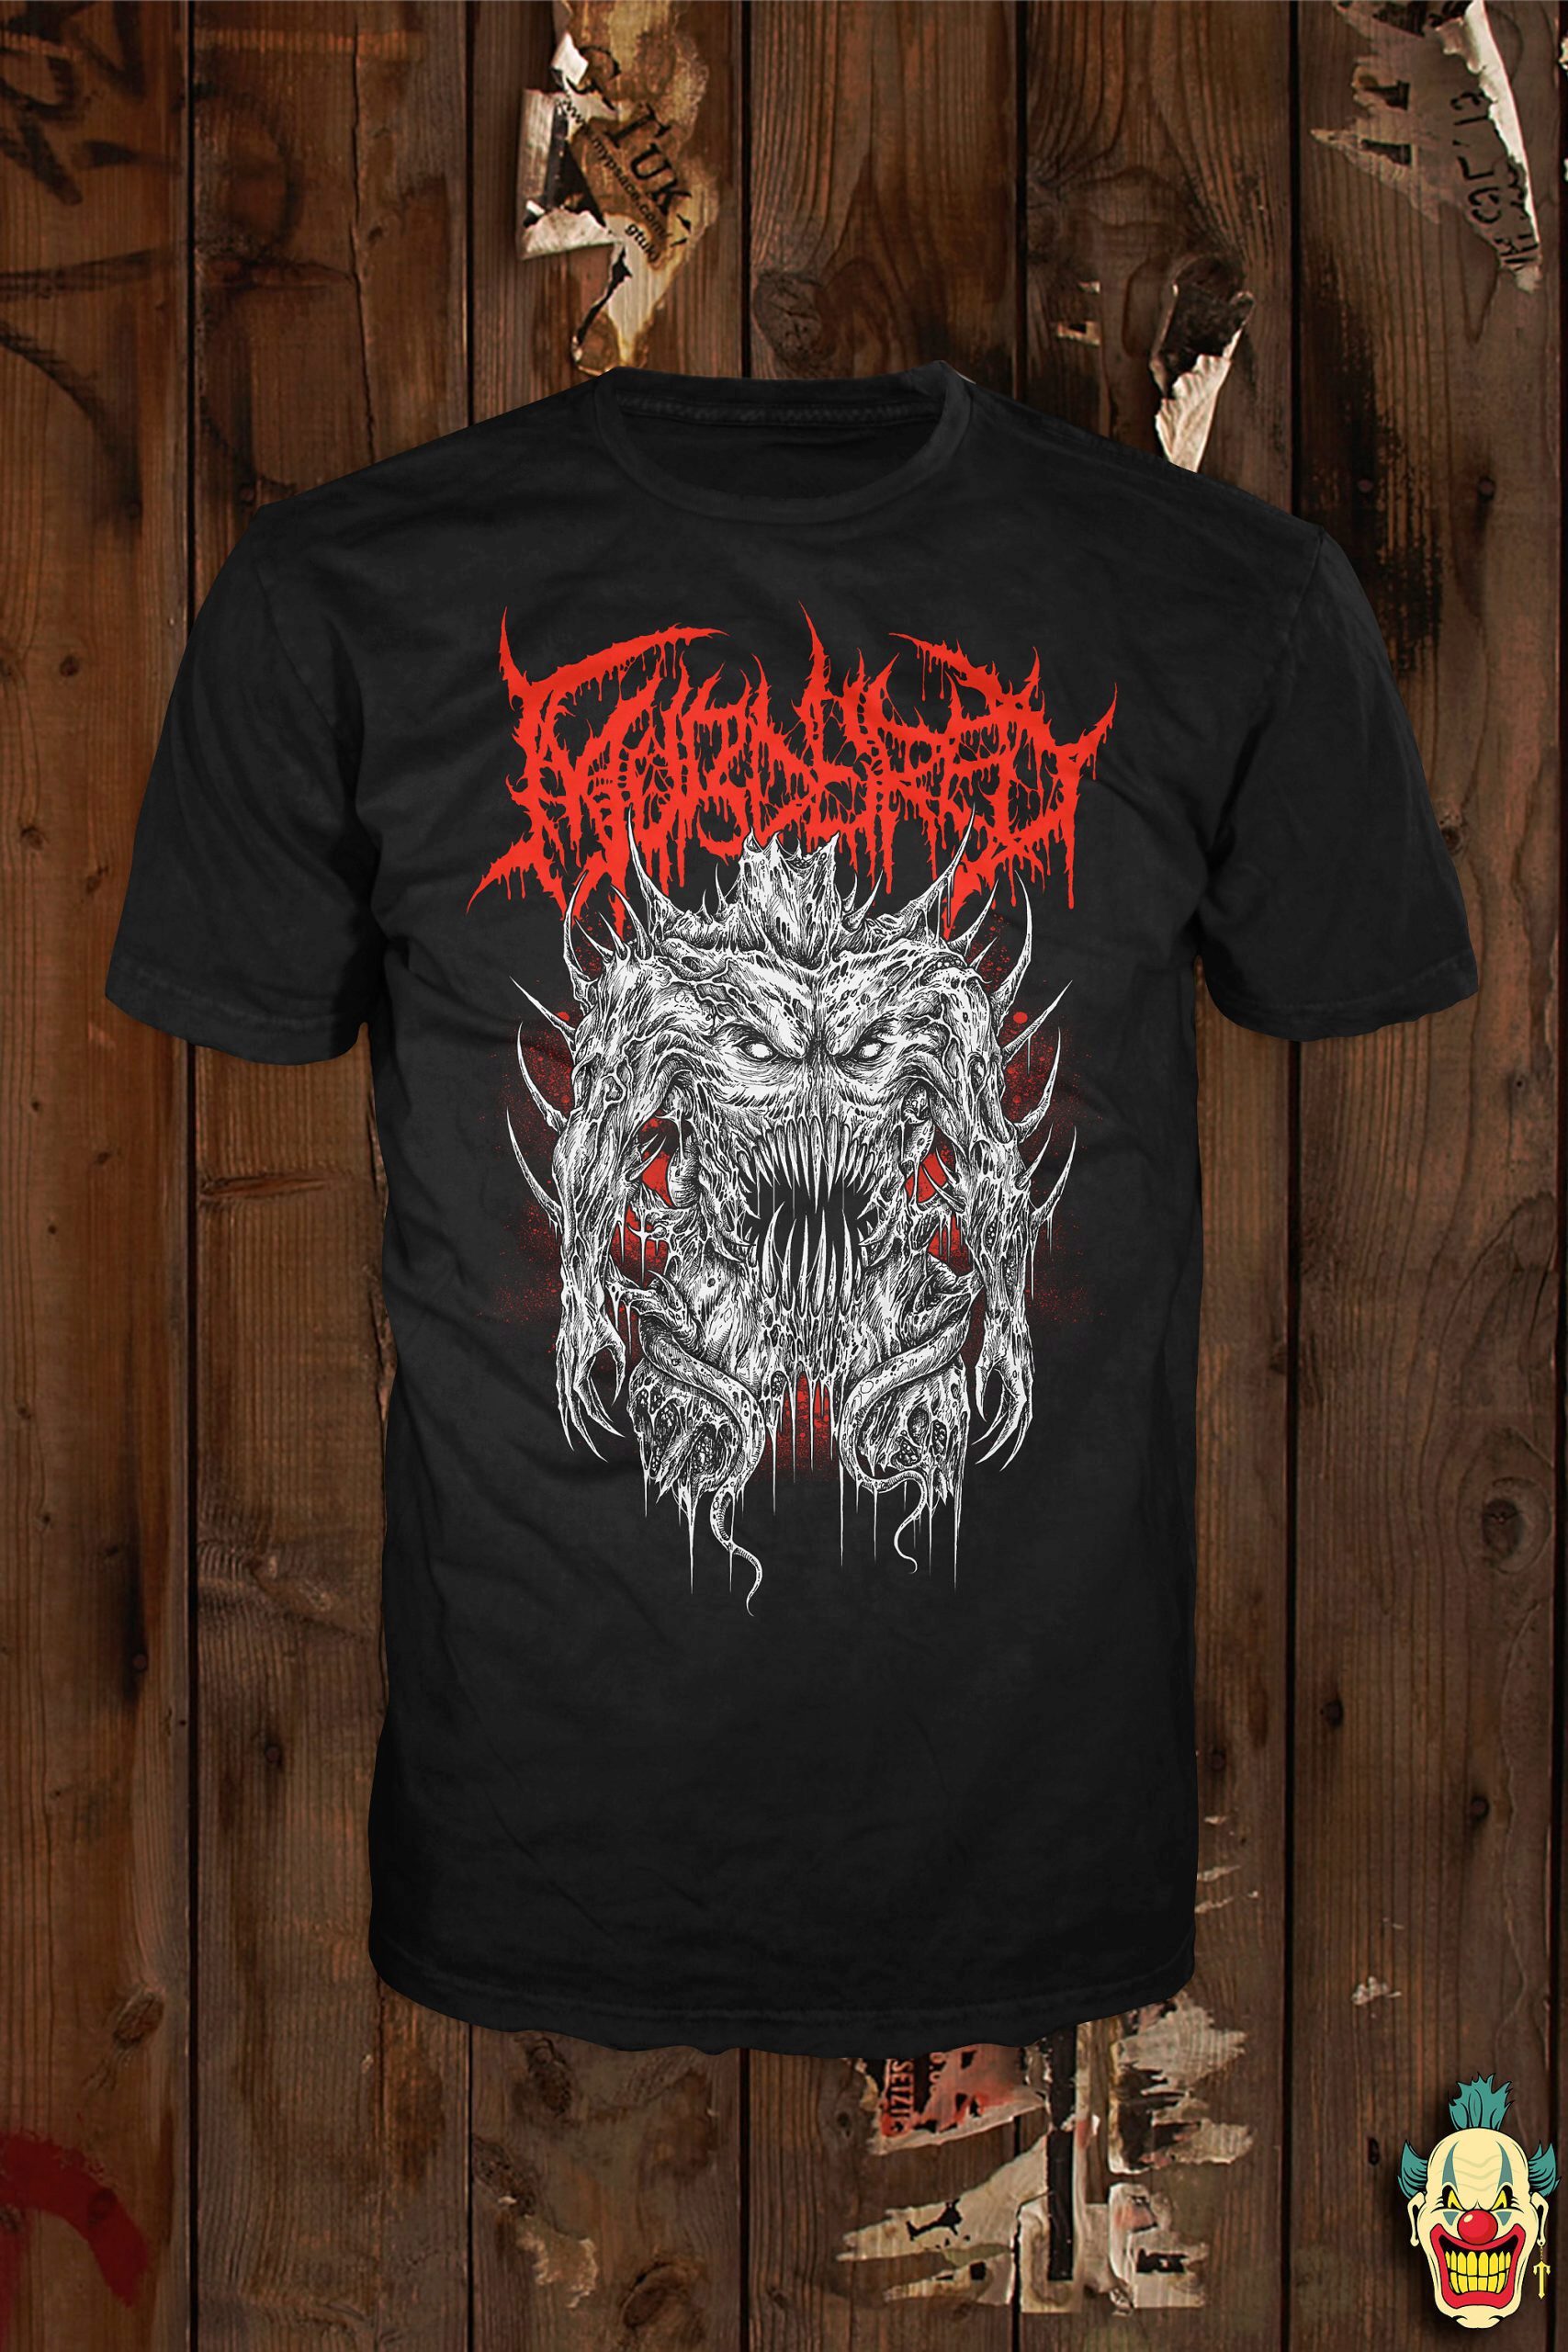 The front of the Possessed Corpse t-shirt